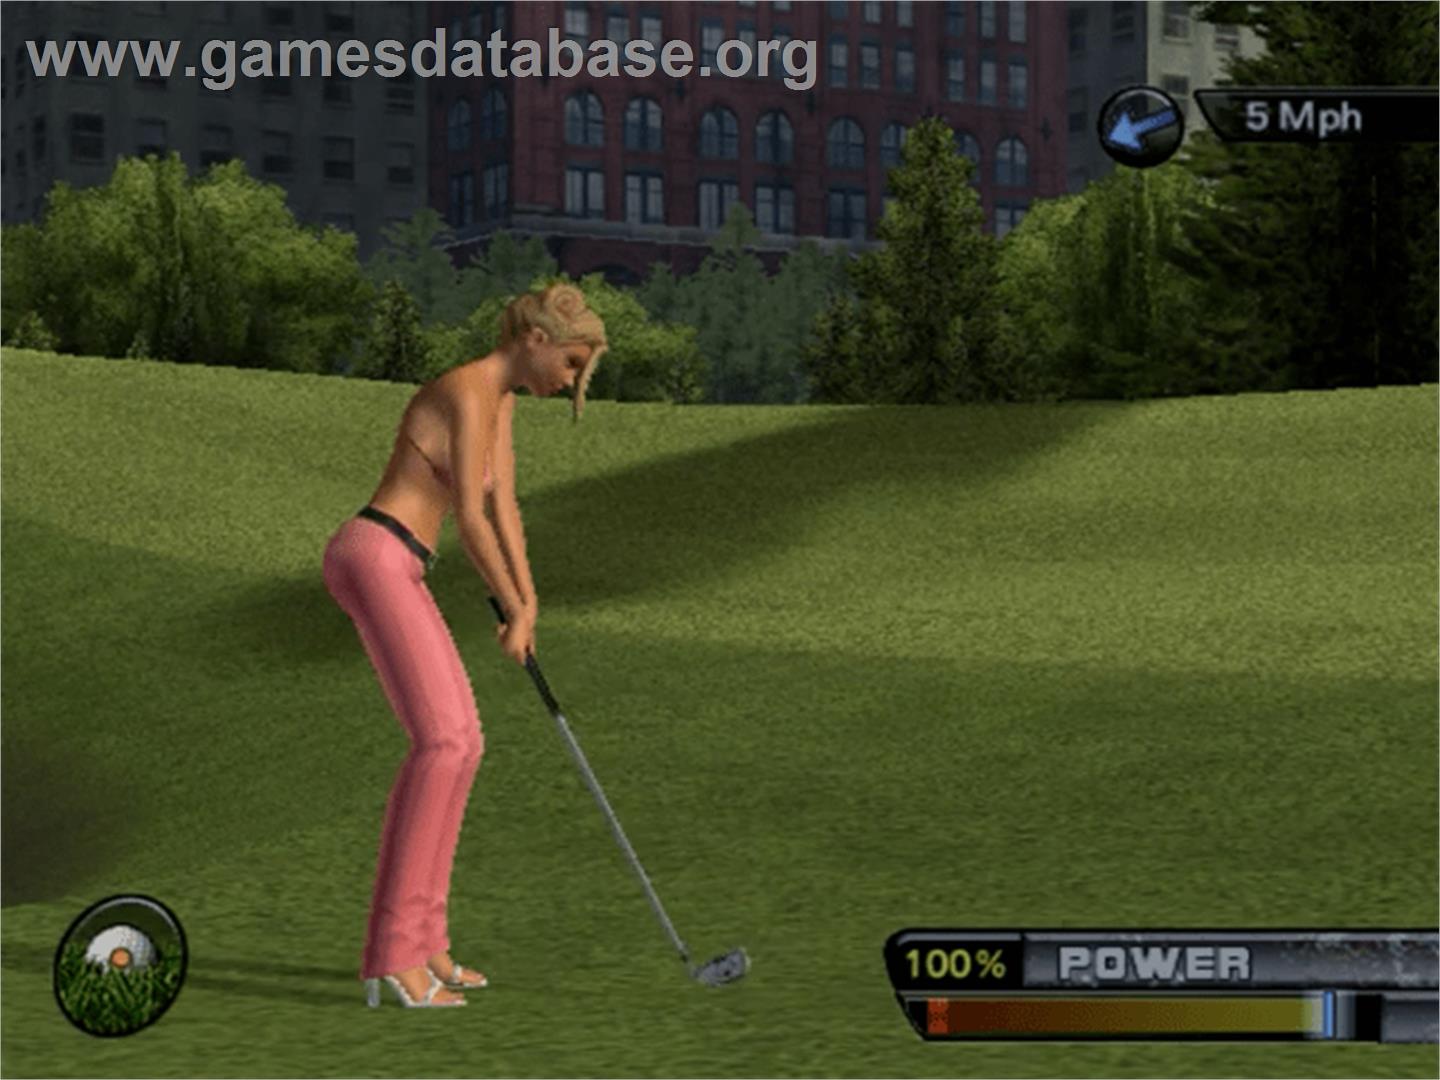 Outlaw golf2 topless erotic videos